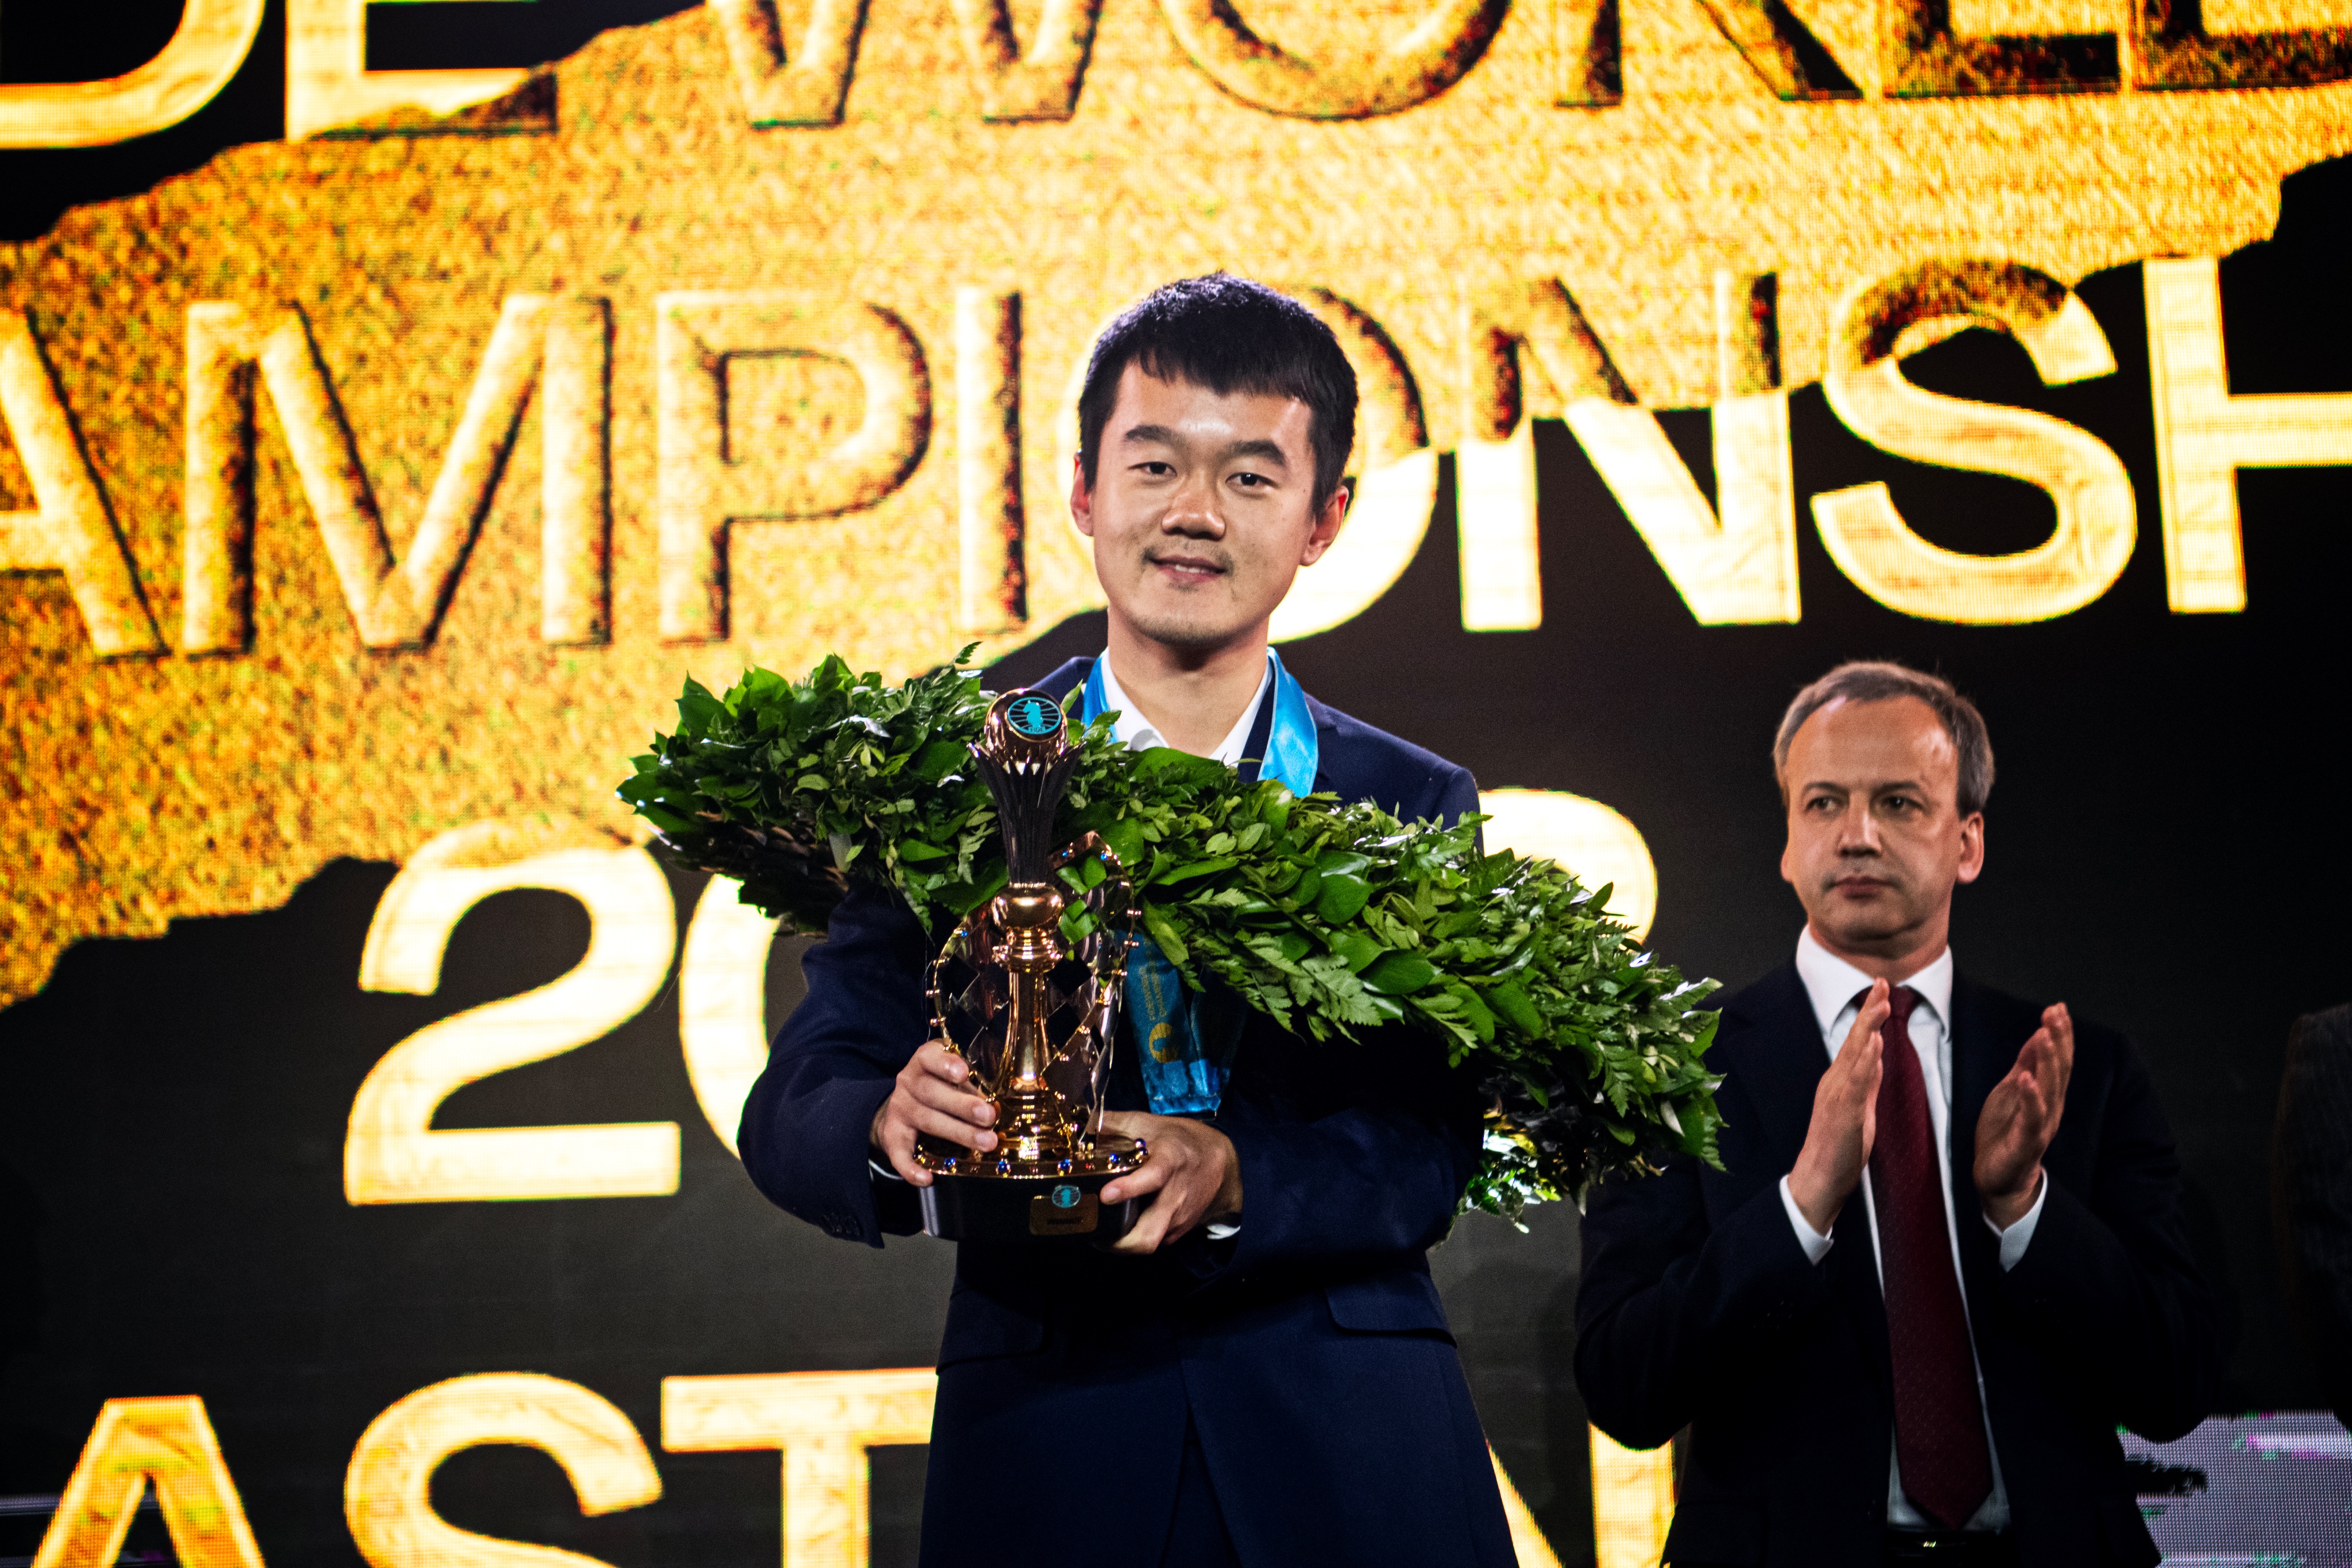 FIDE - International Chess Federation - Ding Liren wins the Chessable  Masters! 👏 The world #2 beat 16-year-old Praggnanandhaa in the gripping  final of the fourth leg of the Meltwater Champions Chess